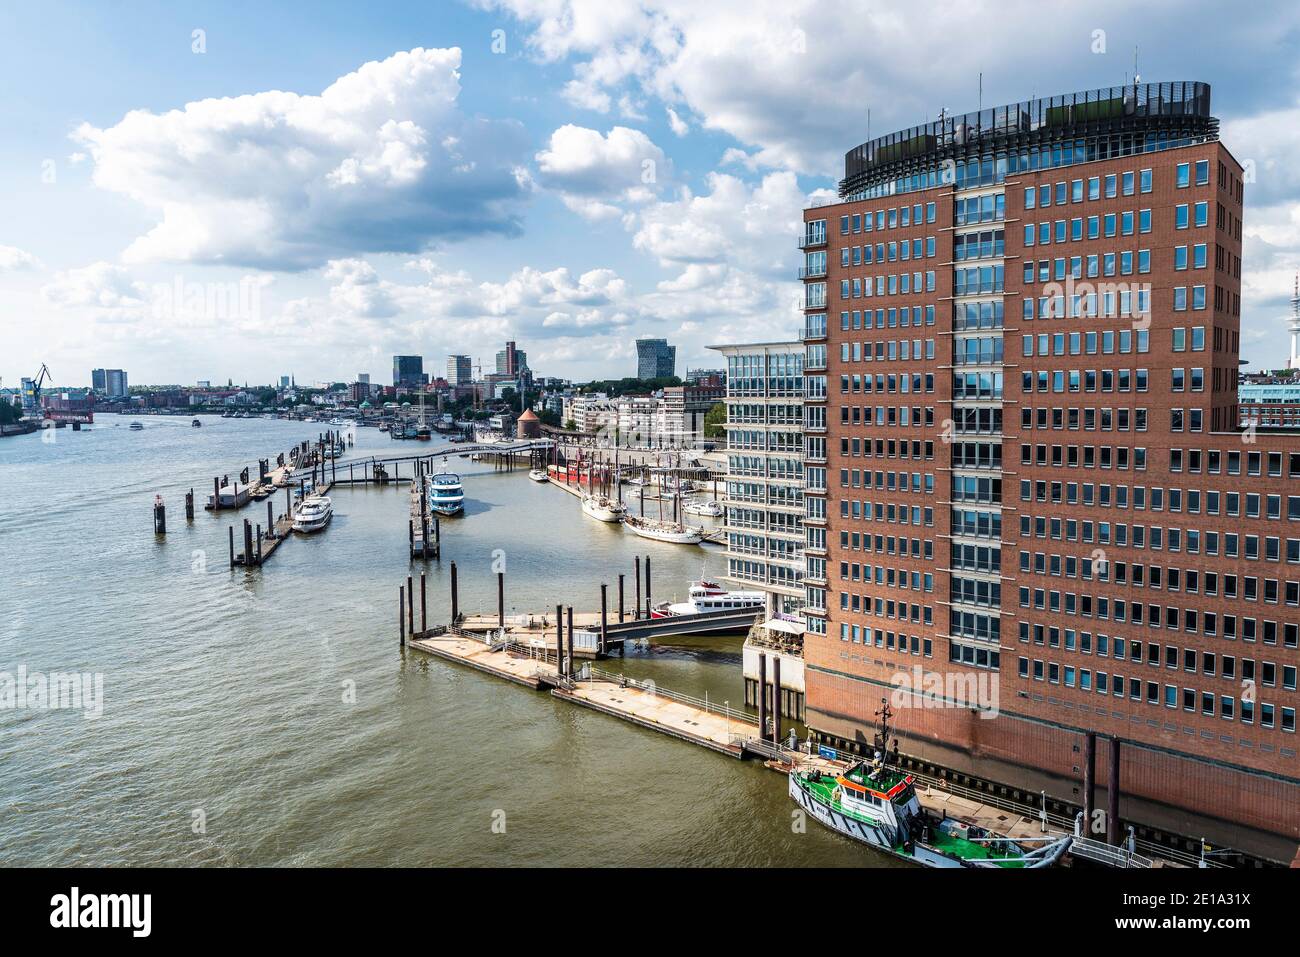 Hamburg, Germany - August 21, 2019: Overview of the Hanseatic Trade Center (HTC) and Columbus Haus, modern office building in HafenCity, in the port o Stock Photo